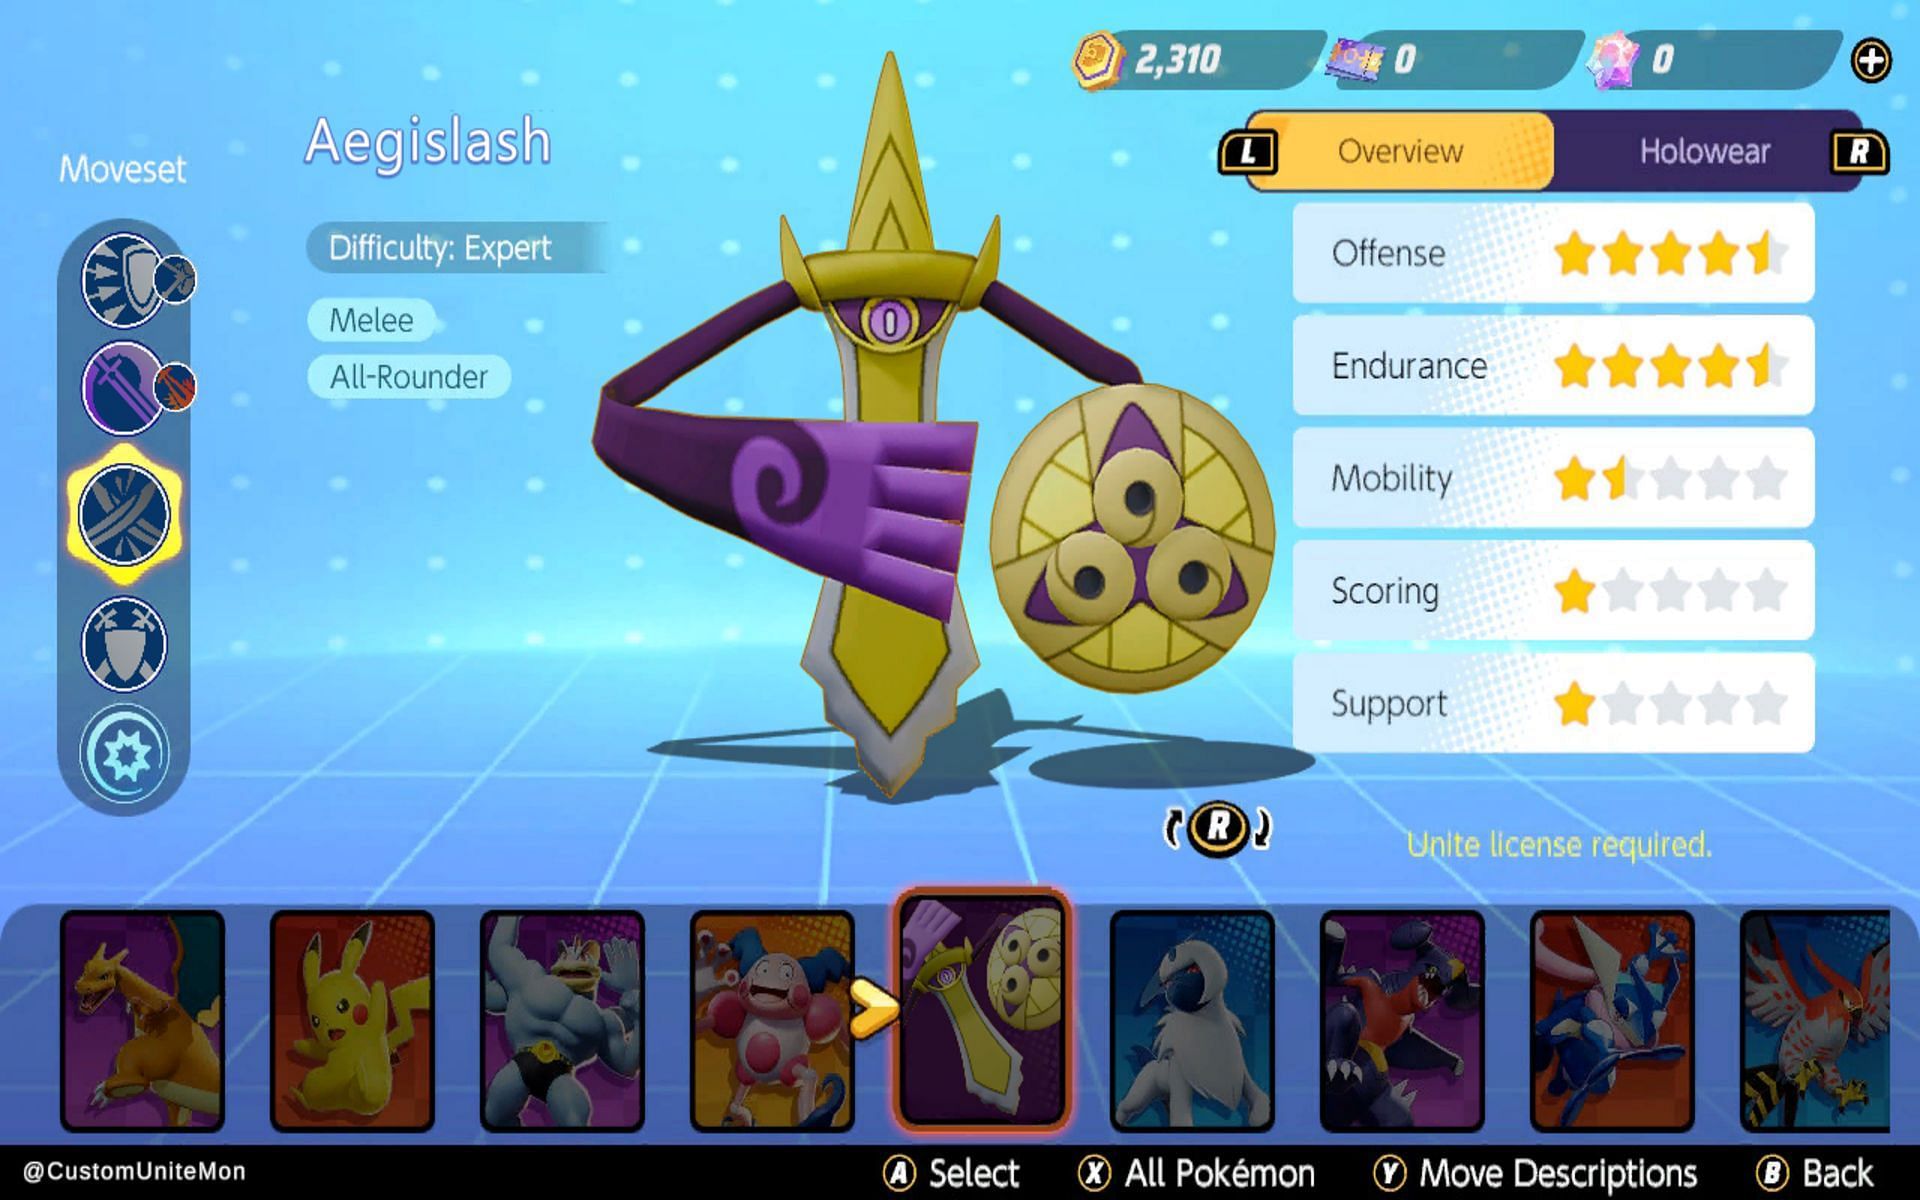 Aegislash is an All-Rounder with good bulk and offense (Image via TiMi Studios)